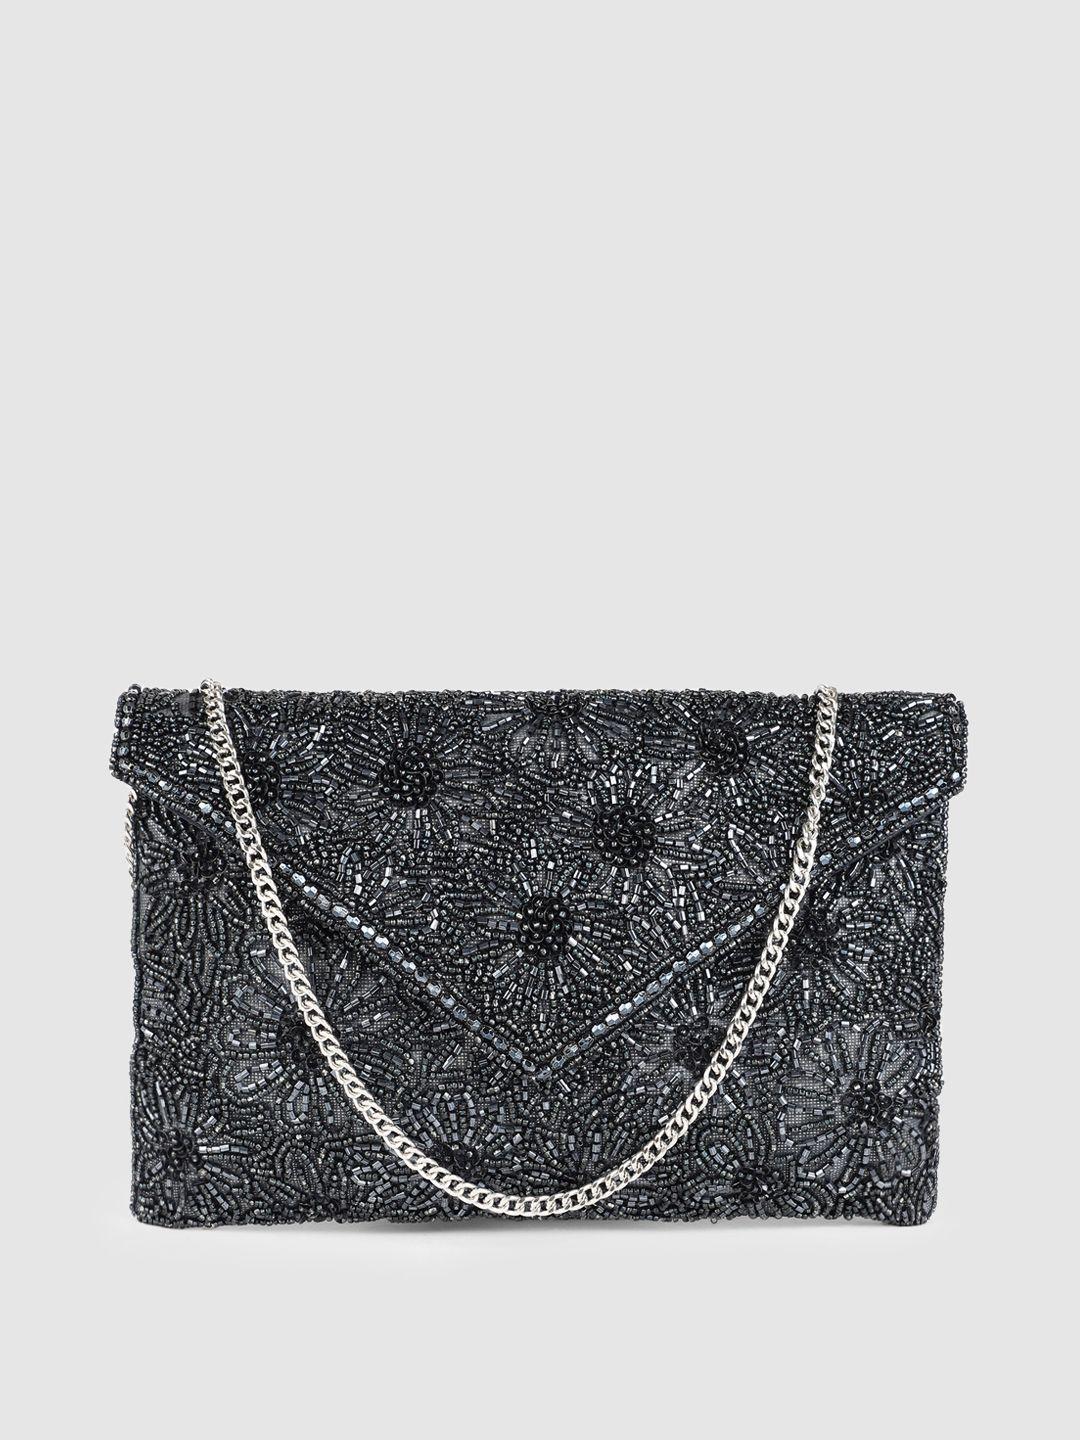 accessorize navy blue embellished structured clutch